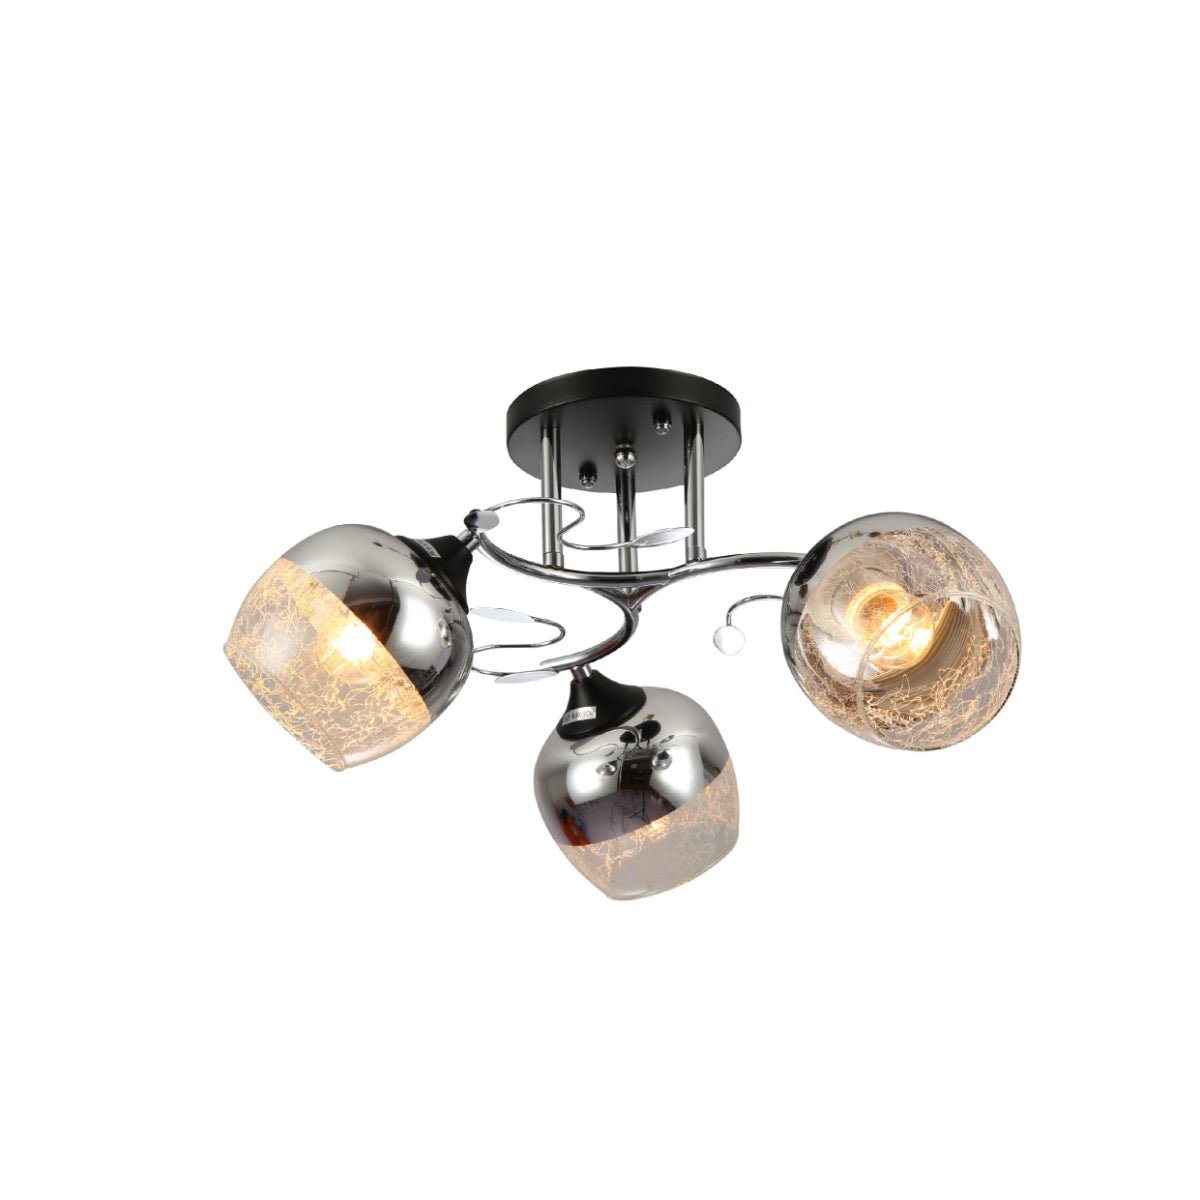 Main image of Chrome Metal Partial Mirror Cone Glass Ceiling Light with E27 Fittings | TEKLED 159-17606